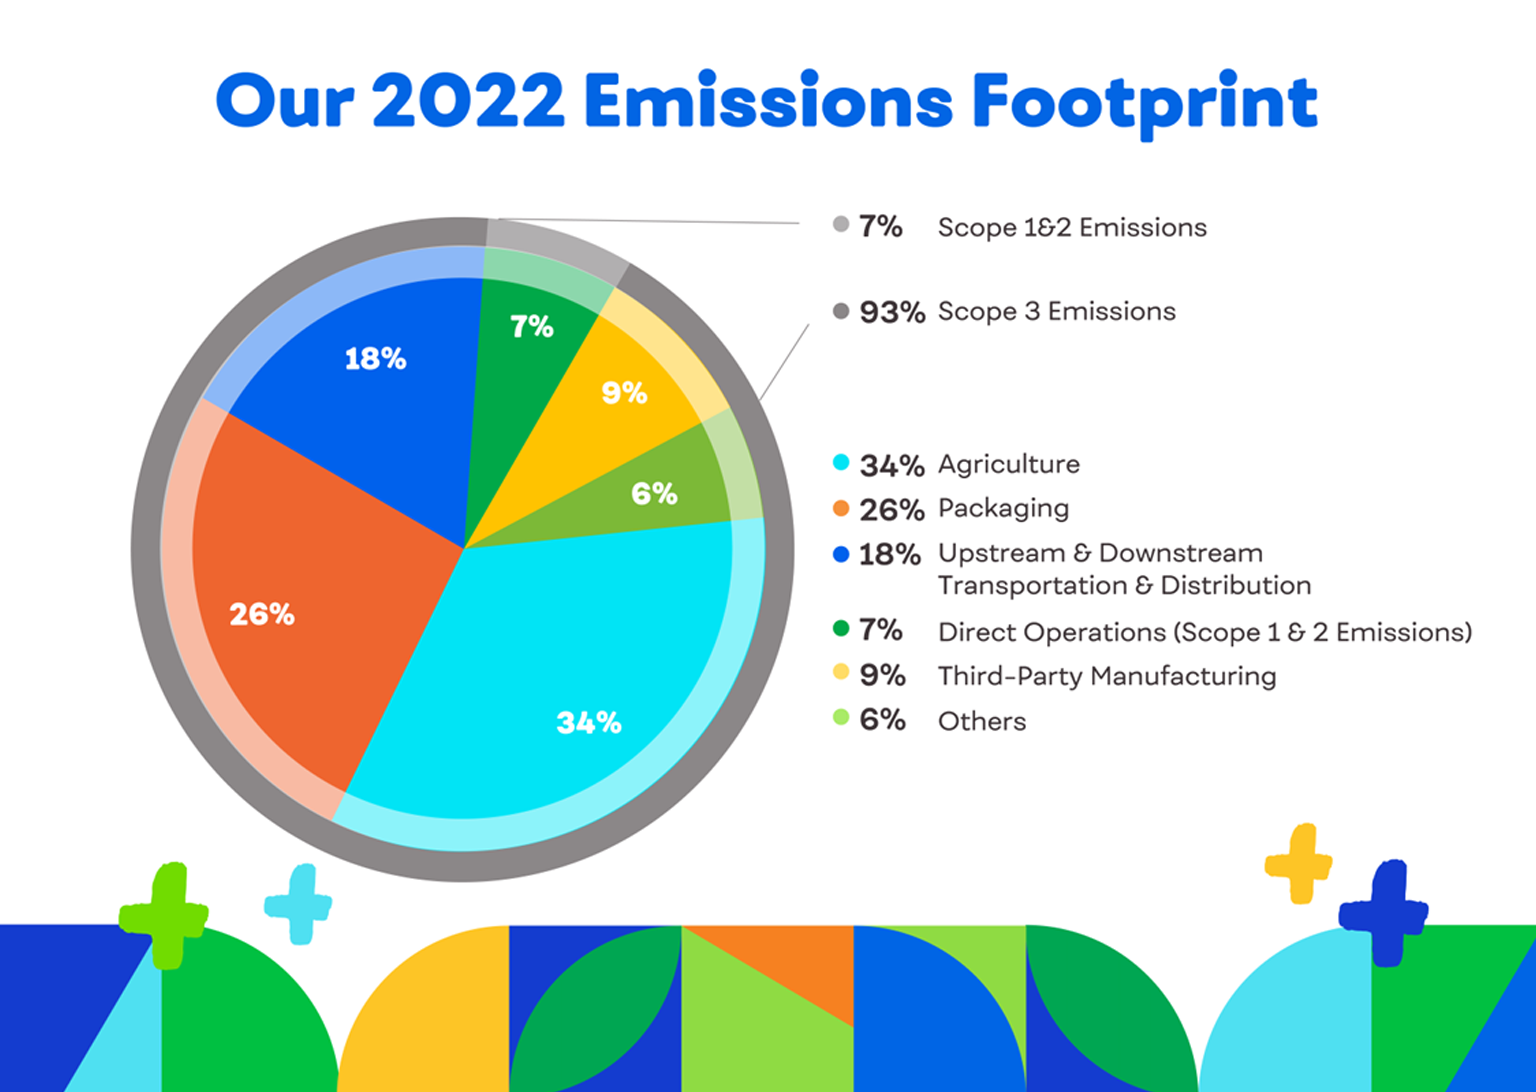 Our 2022 Emissions Footprint infographic